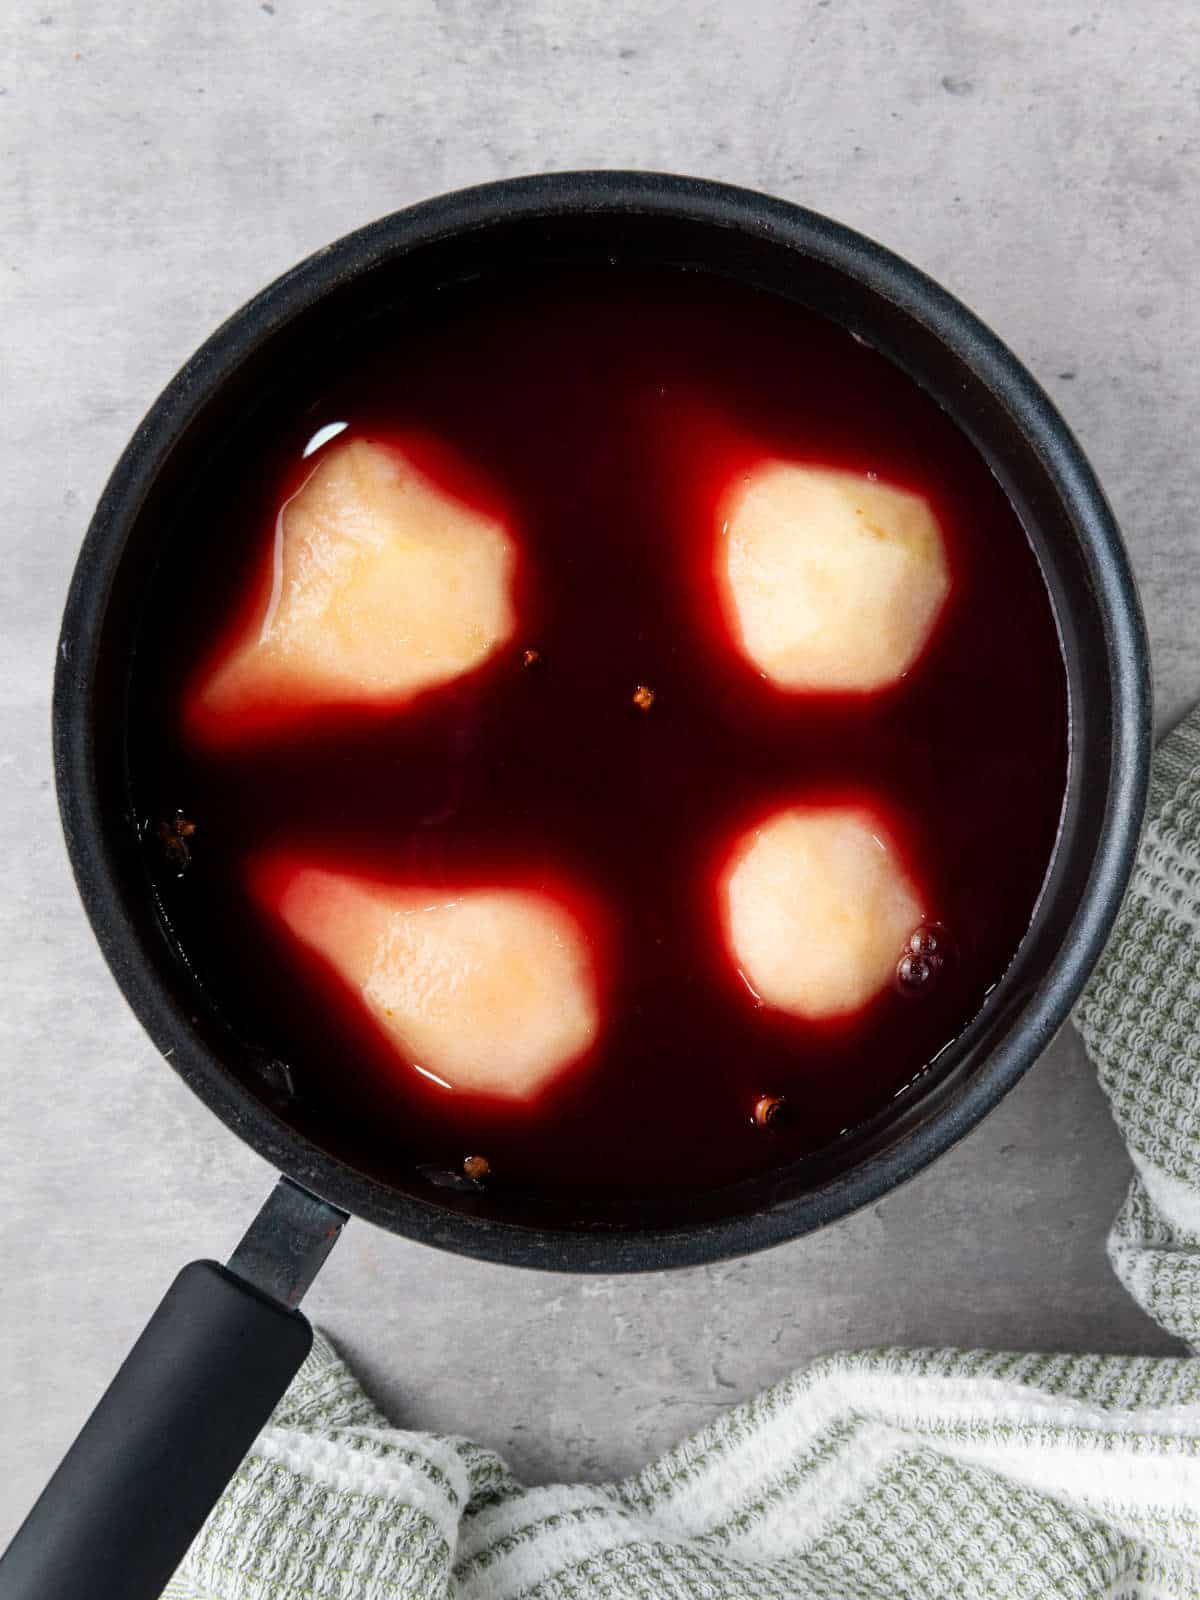 Four peeled pears in a sauce pan with red wine and spices.